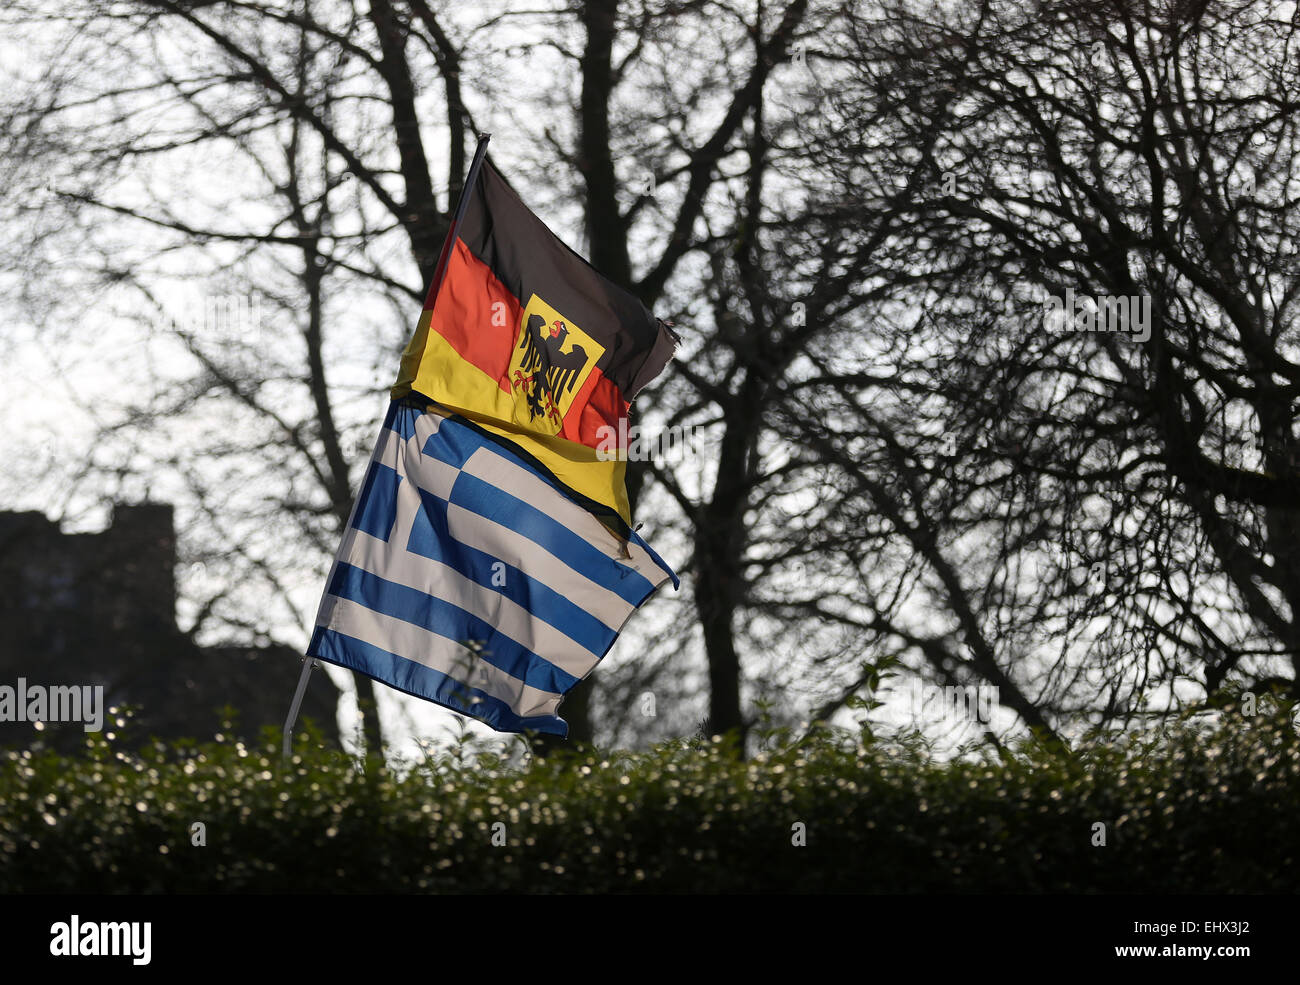 The German Top And The Greek National Flags Sway In The Wind In